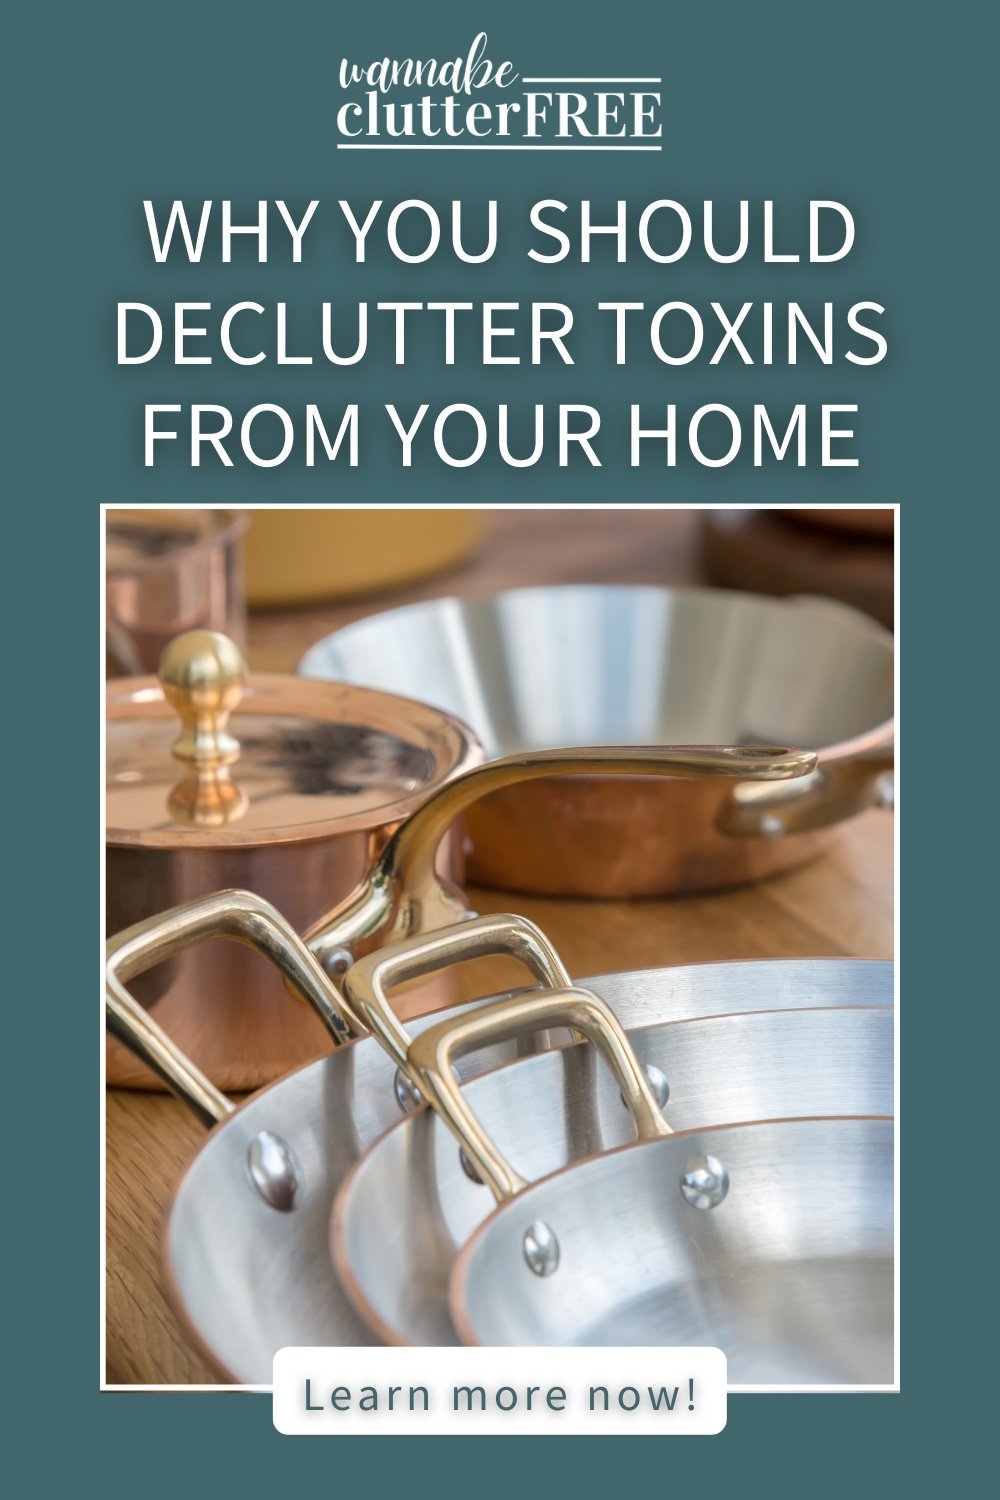 Why You Should Declutter Toxins From Your Home